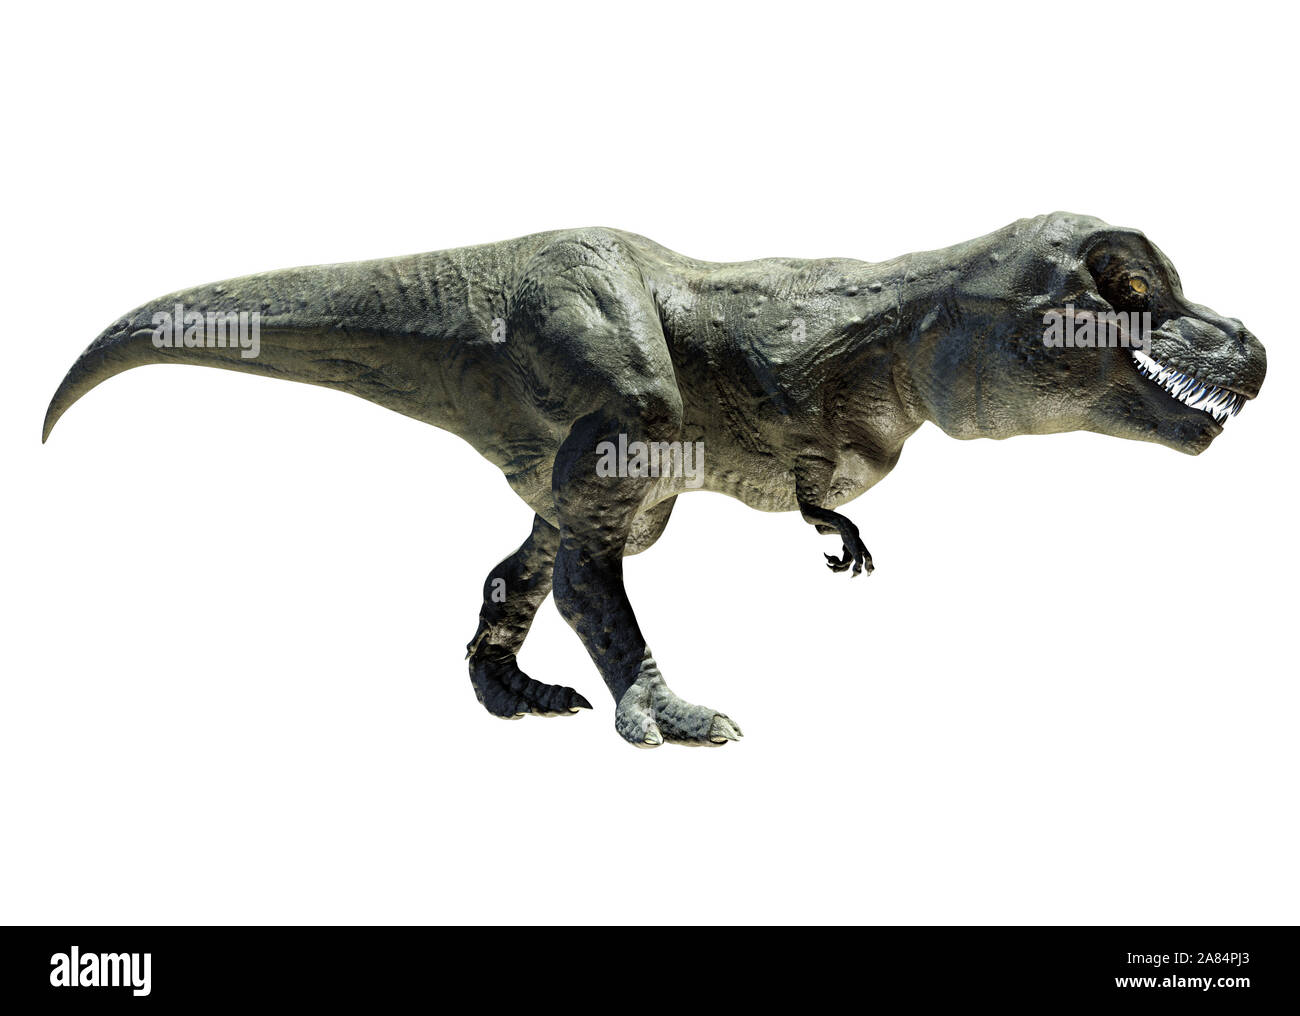 The big dinosaur call T Rex in 3D view Stock Photo